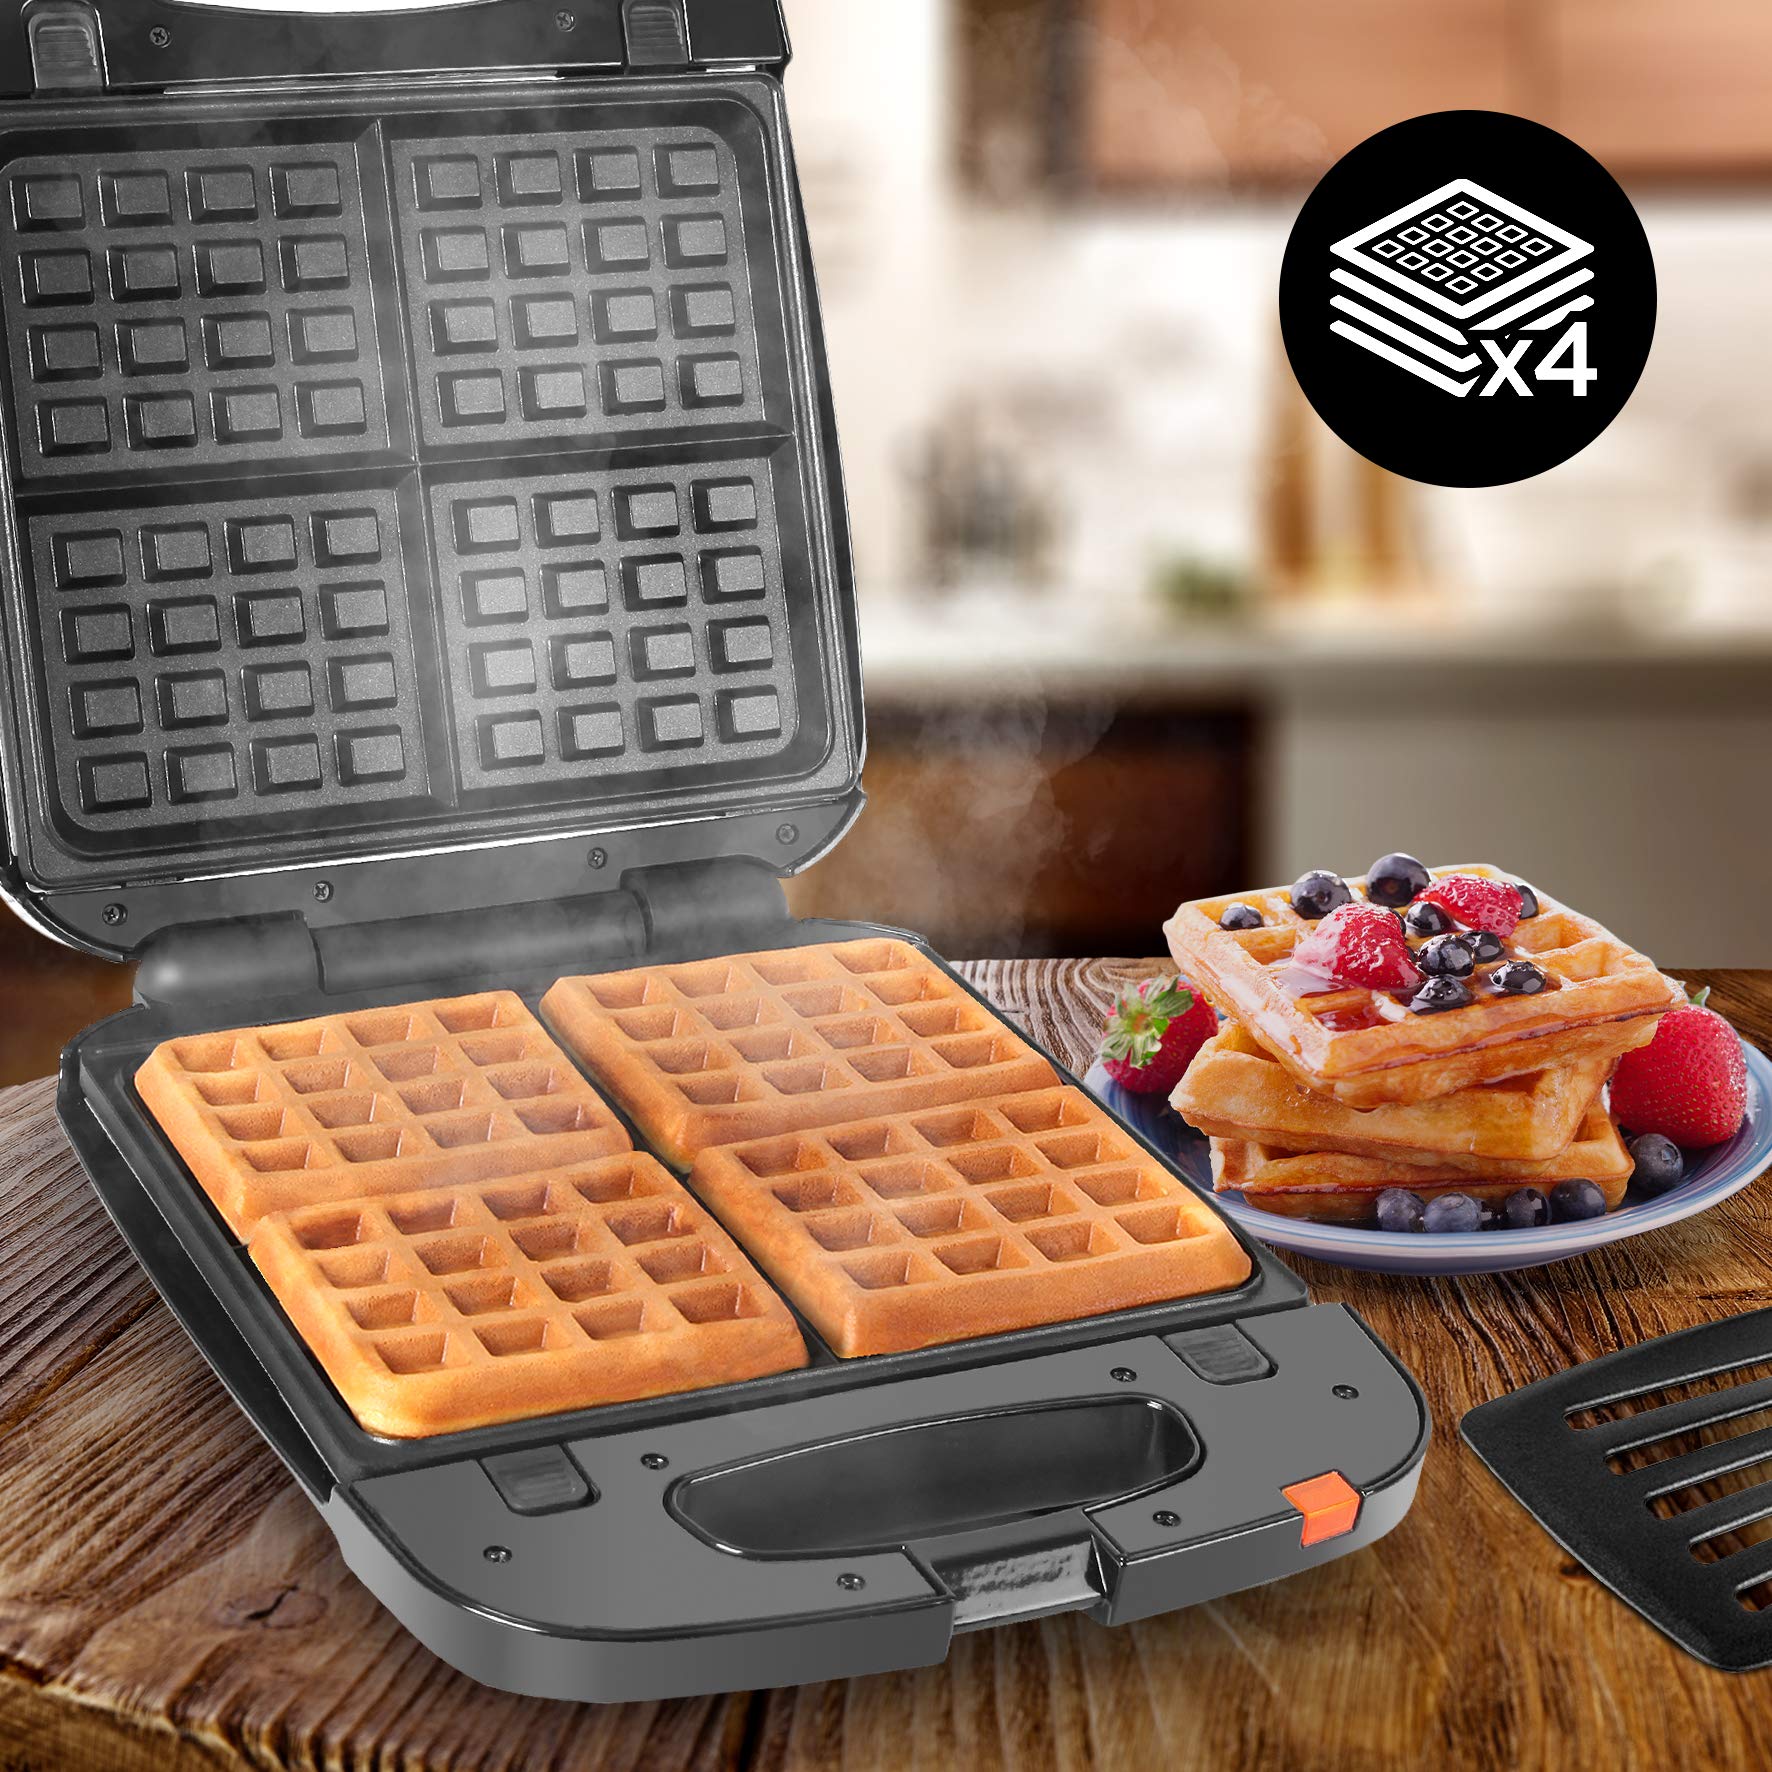 Duronic Waffle Maker WM60 Non Stick Waffle Iron 4 Square Belgian Waffle Makers with Removable Plates Waffle Machine for Croffles & American Style Waffles